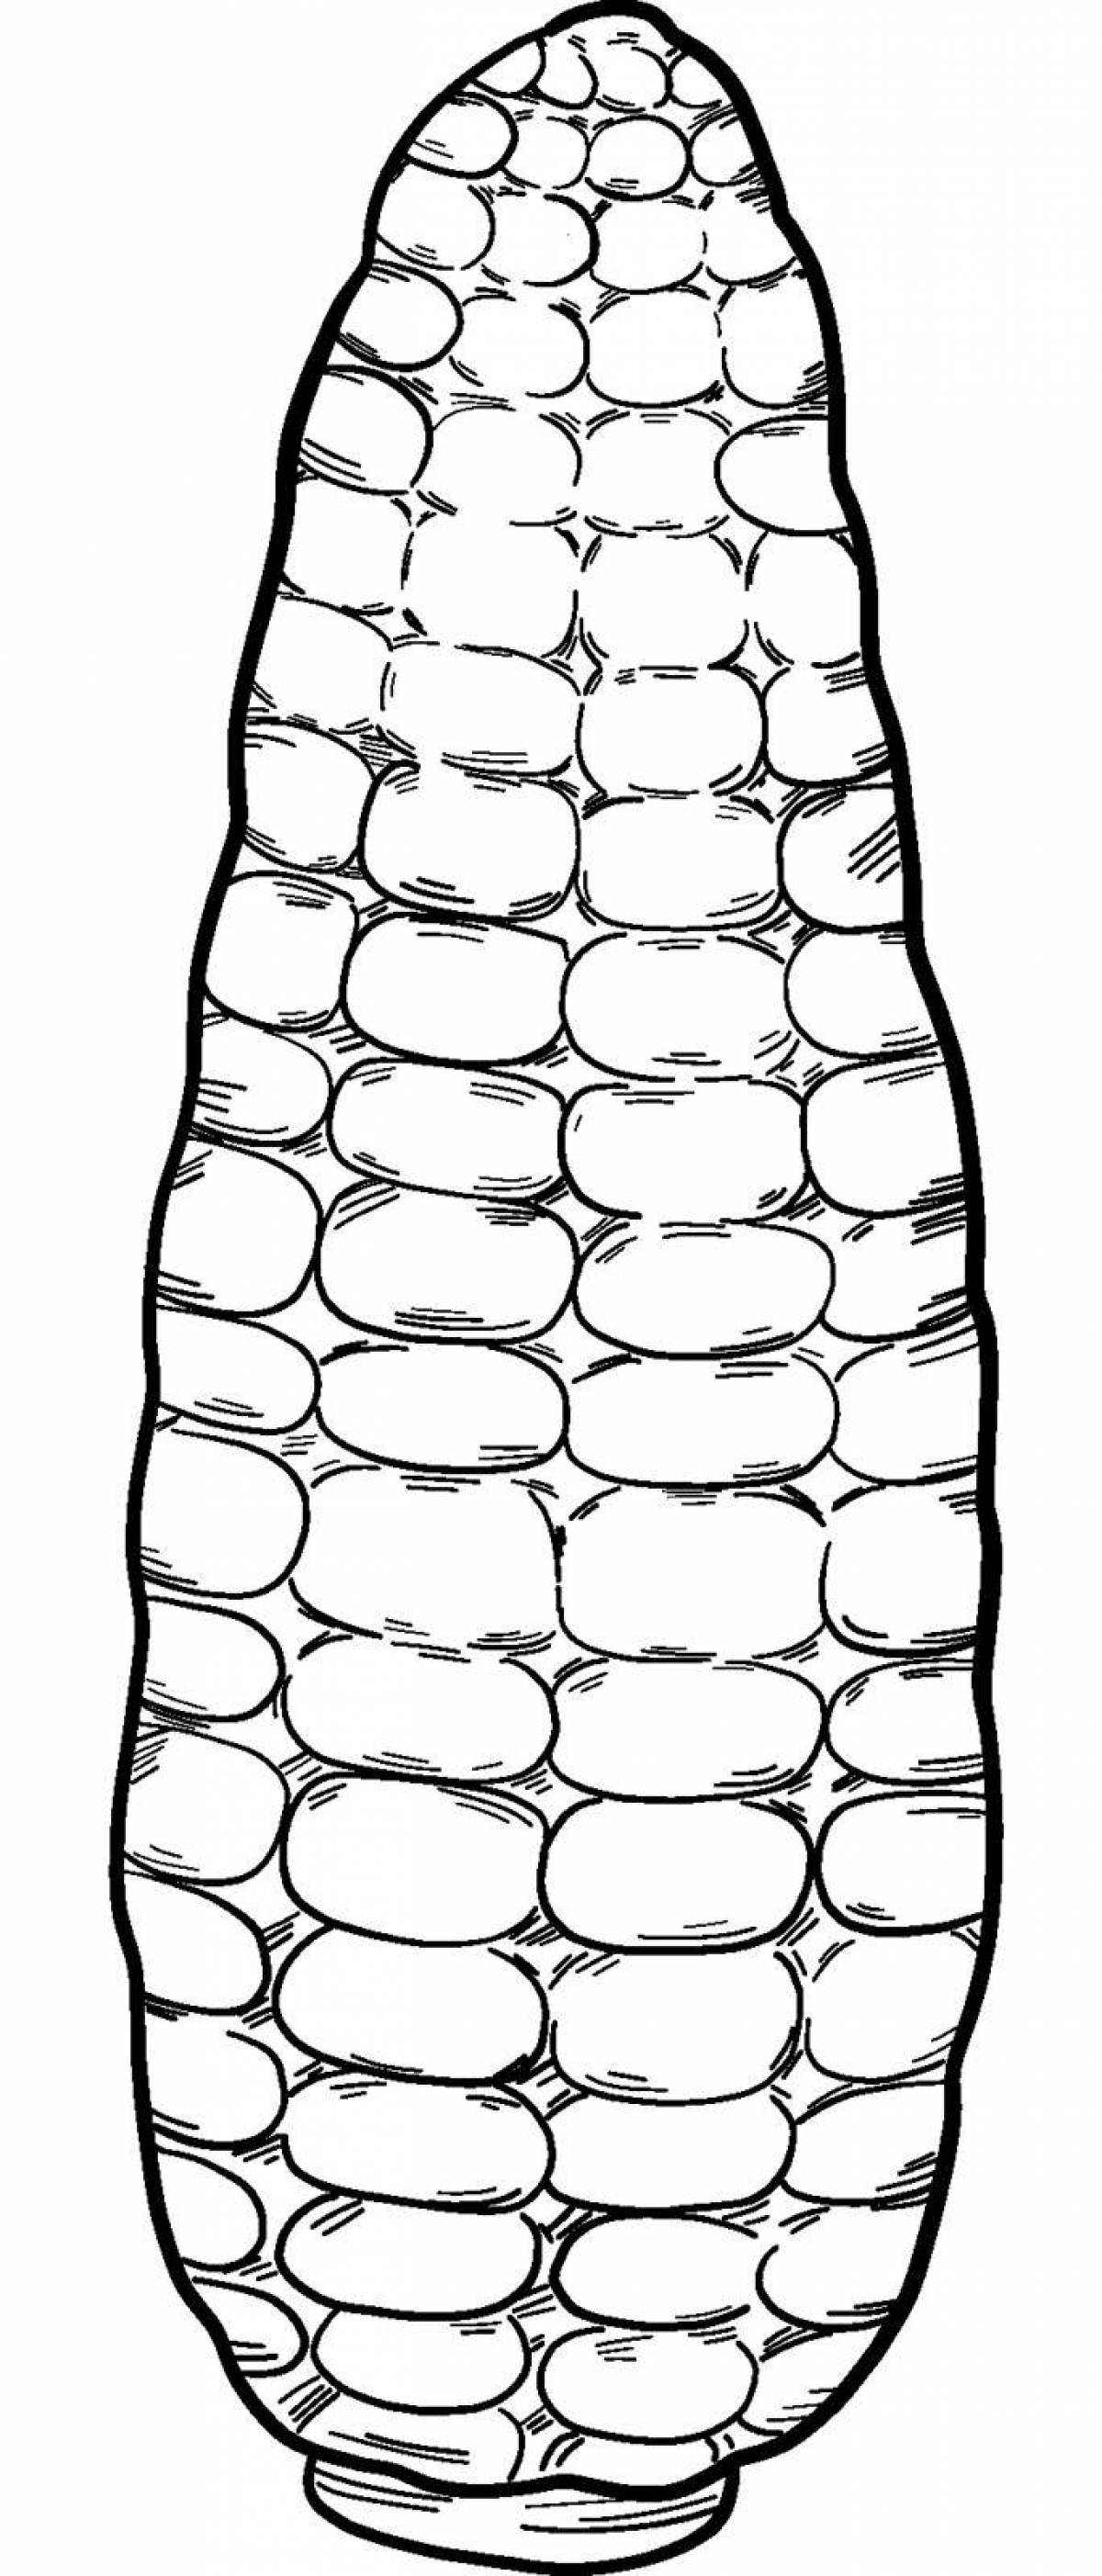 Creative corn coloring book for kids